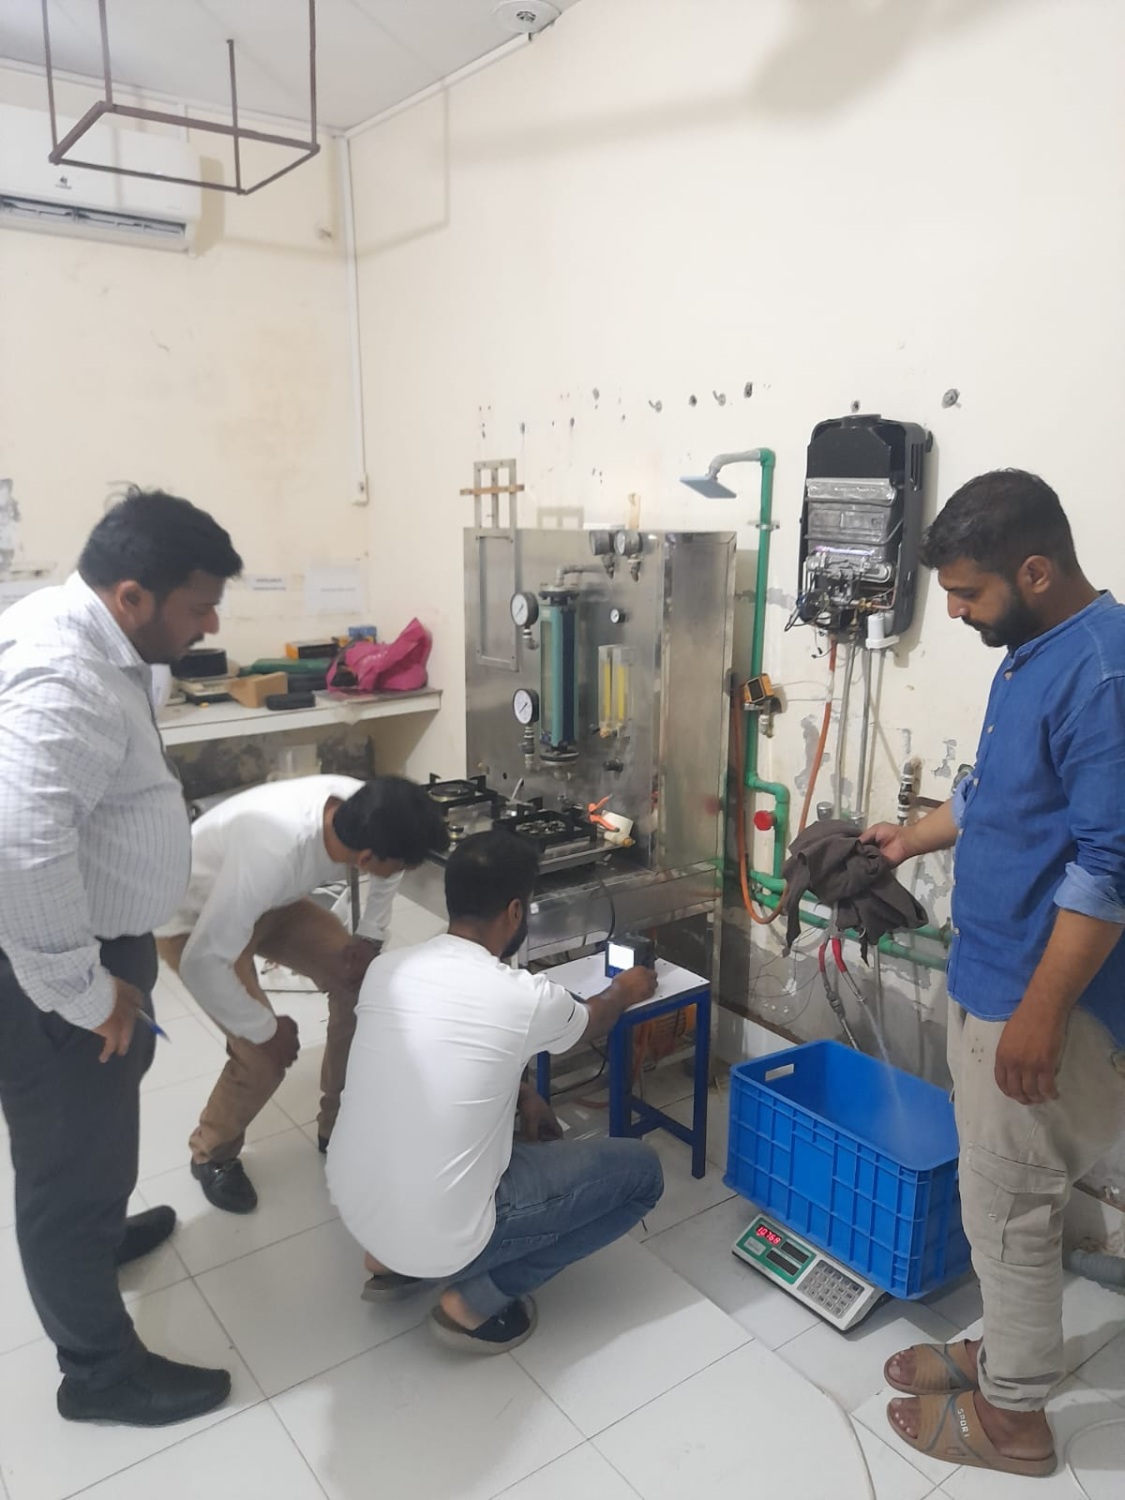 A water heater test lab in Gujranwala, Punjab